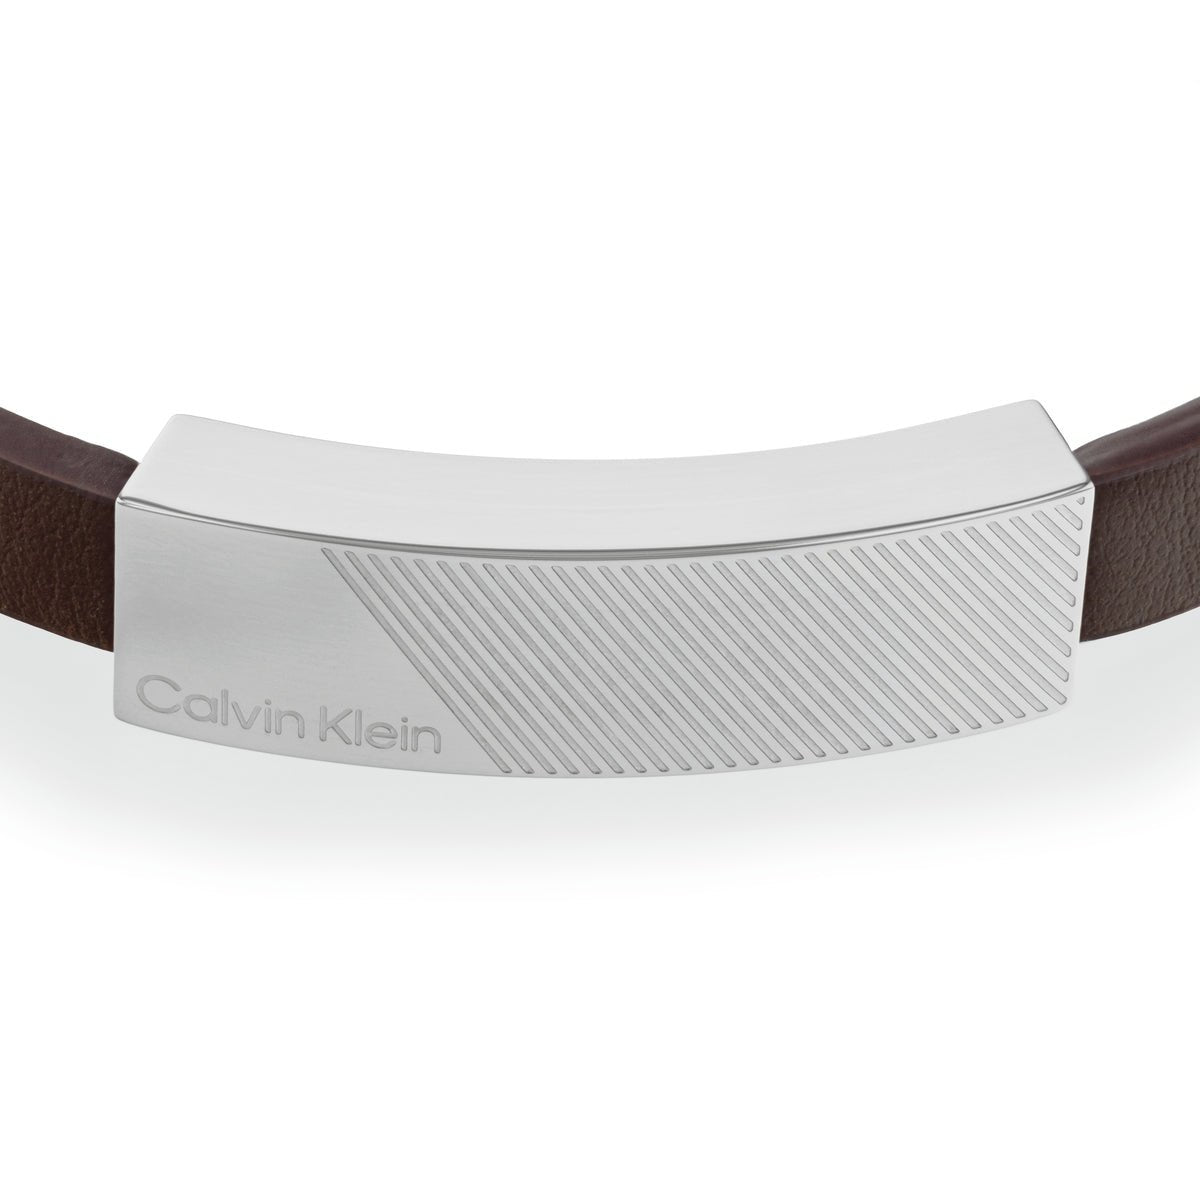 Shop Calvin Klein Unisex Leather Stainless Bracelets by nopple | BUYMA